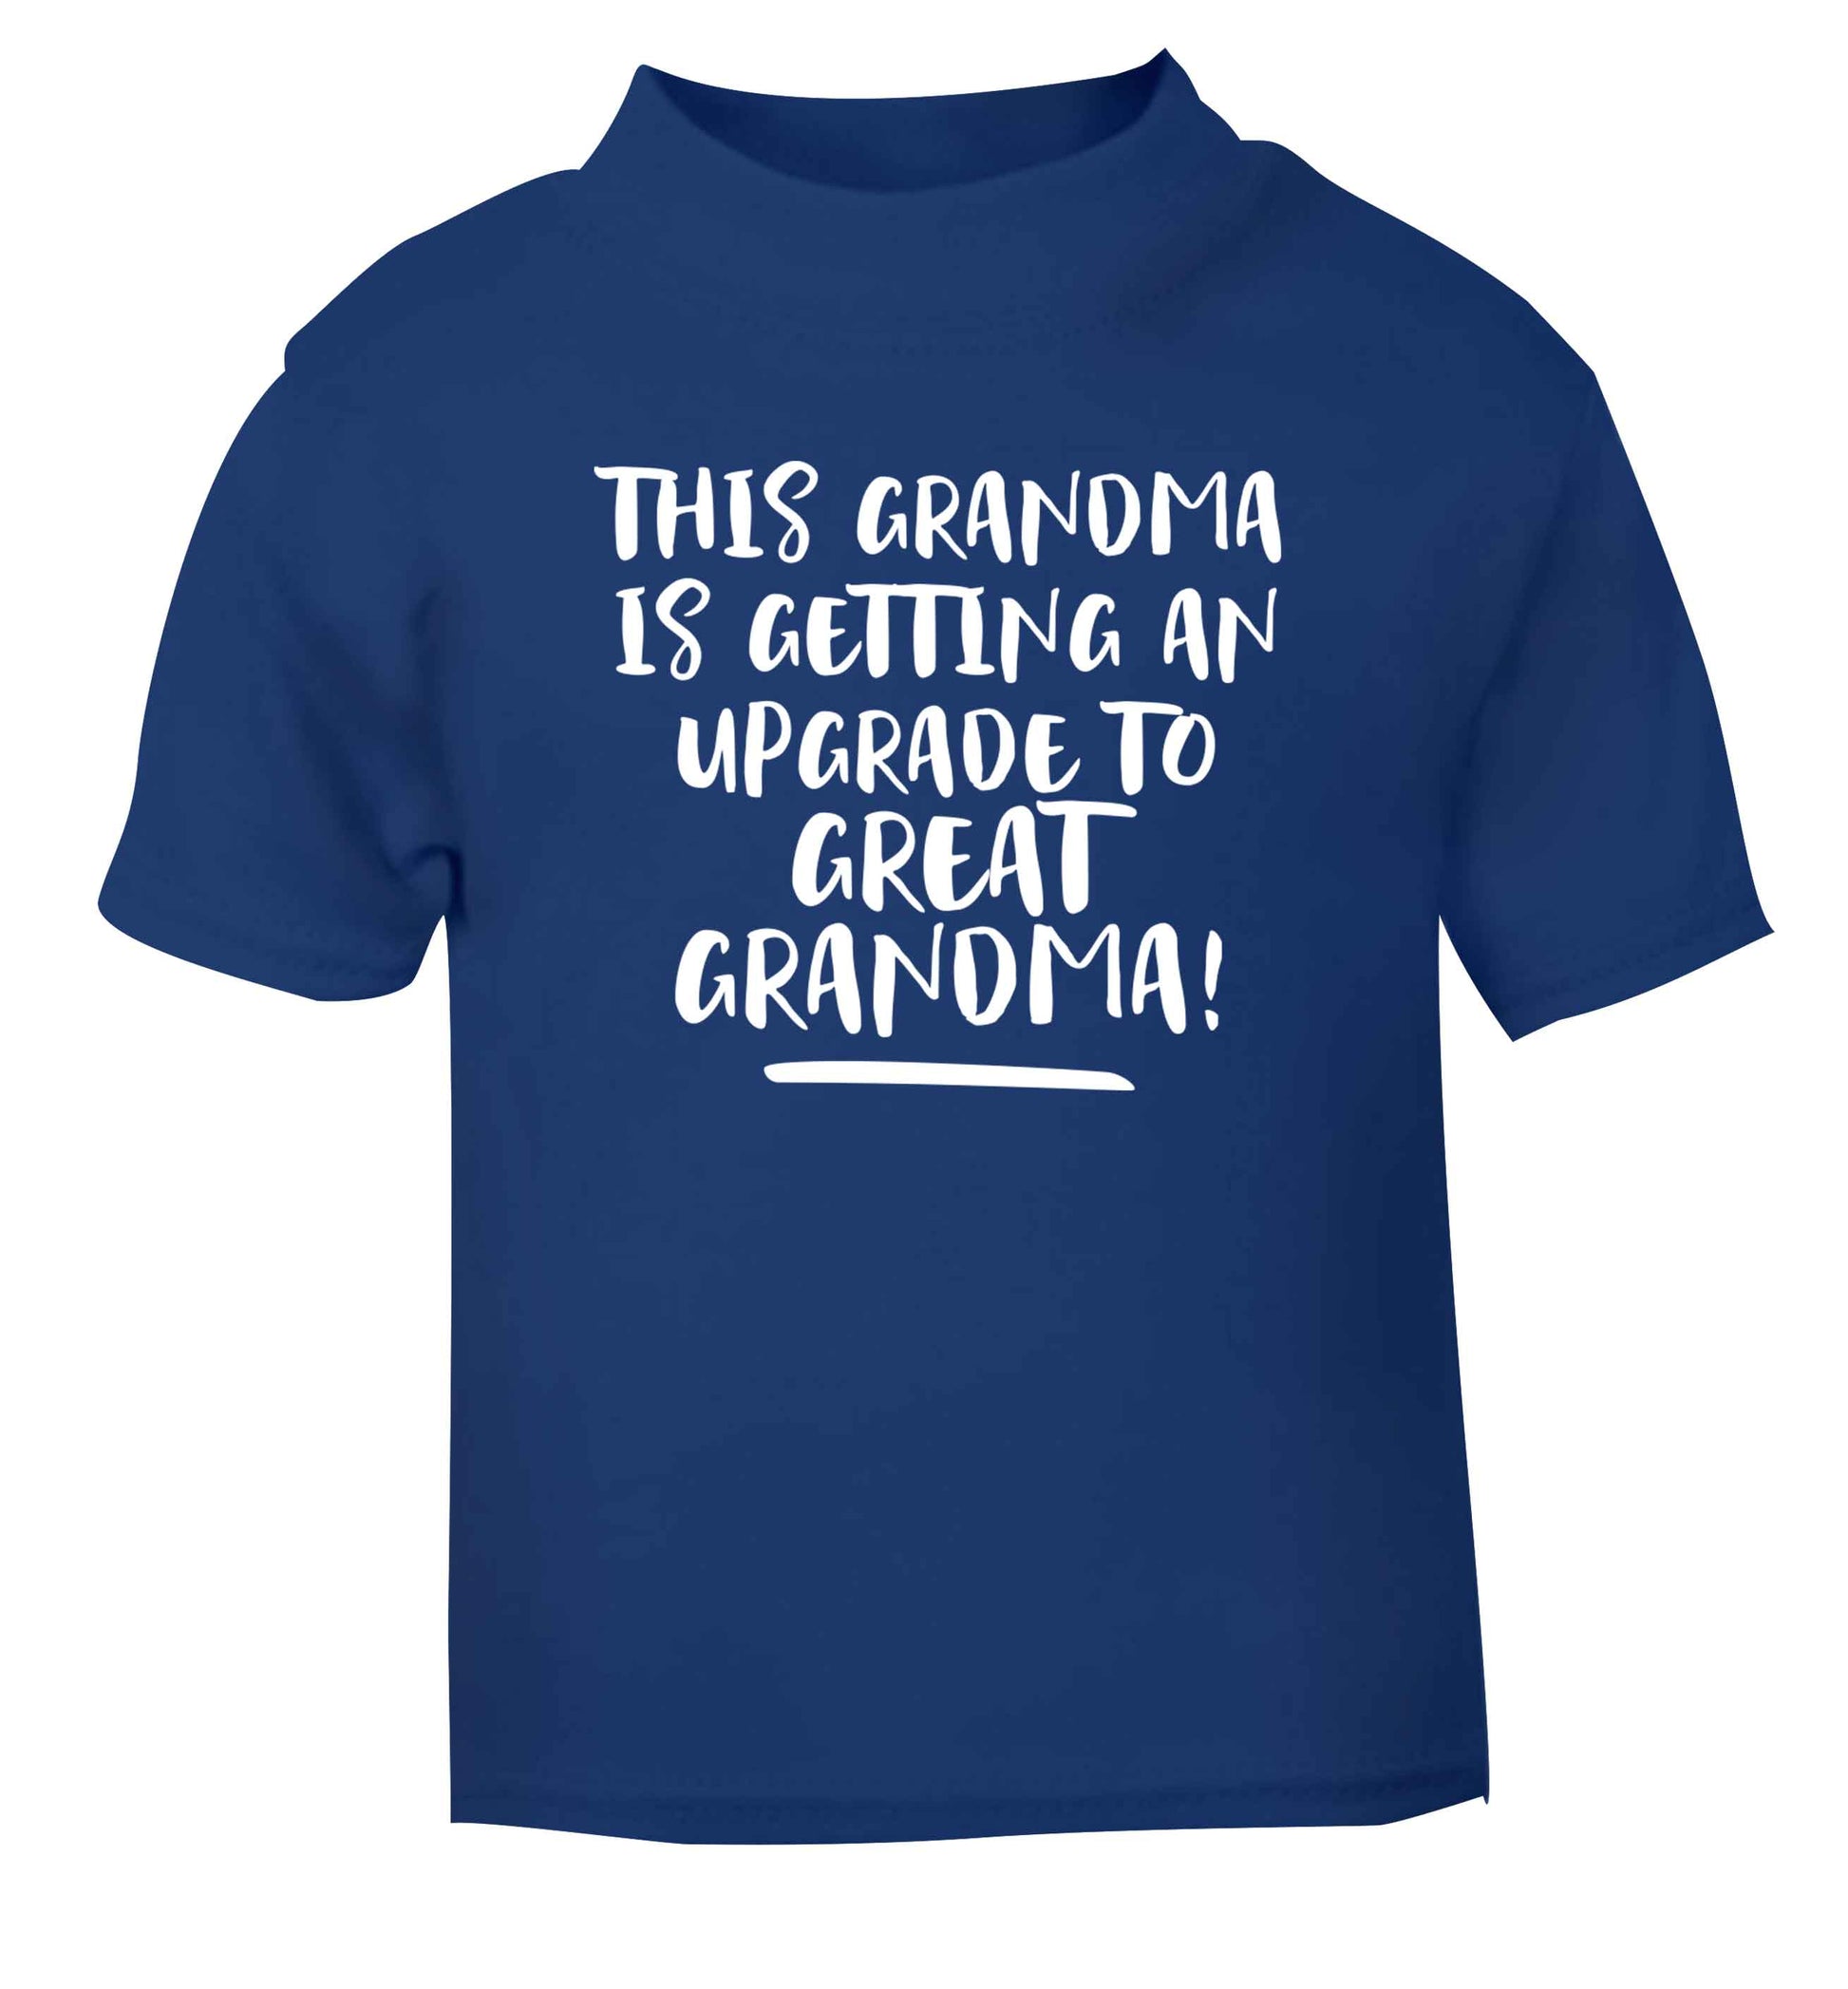 This grandma is getting an upgrade to great grandma! blue Baby Toddler Tshirt 2 Years